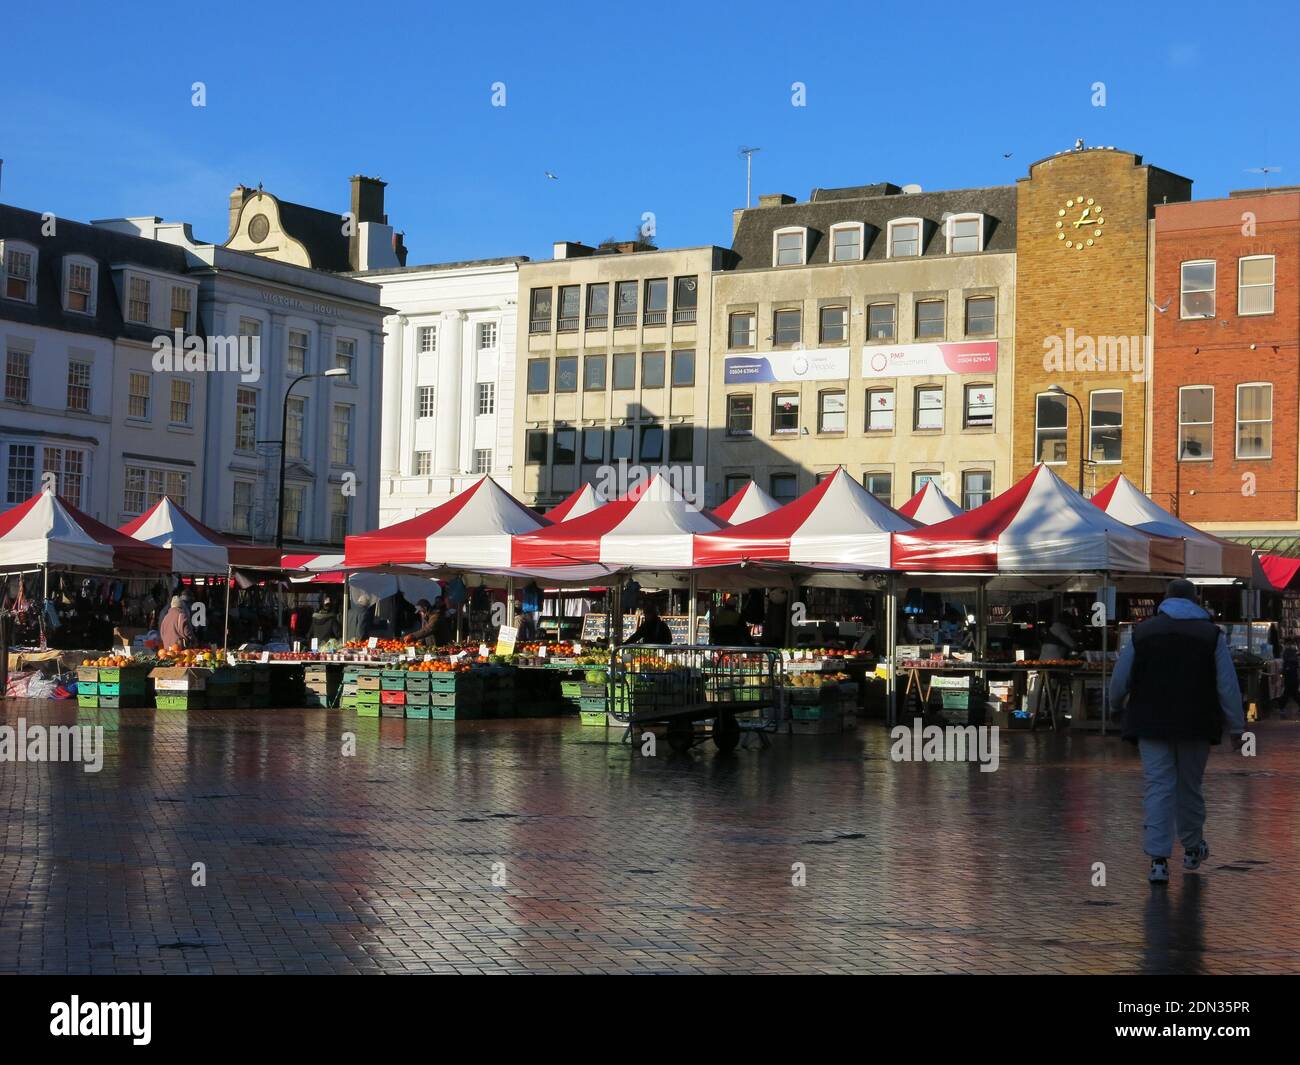 With its origins in medieval times, Northampton's Market Square continues to this day with colourful awnings over the stalls of fruit & veg. Stock Photo